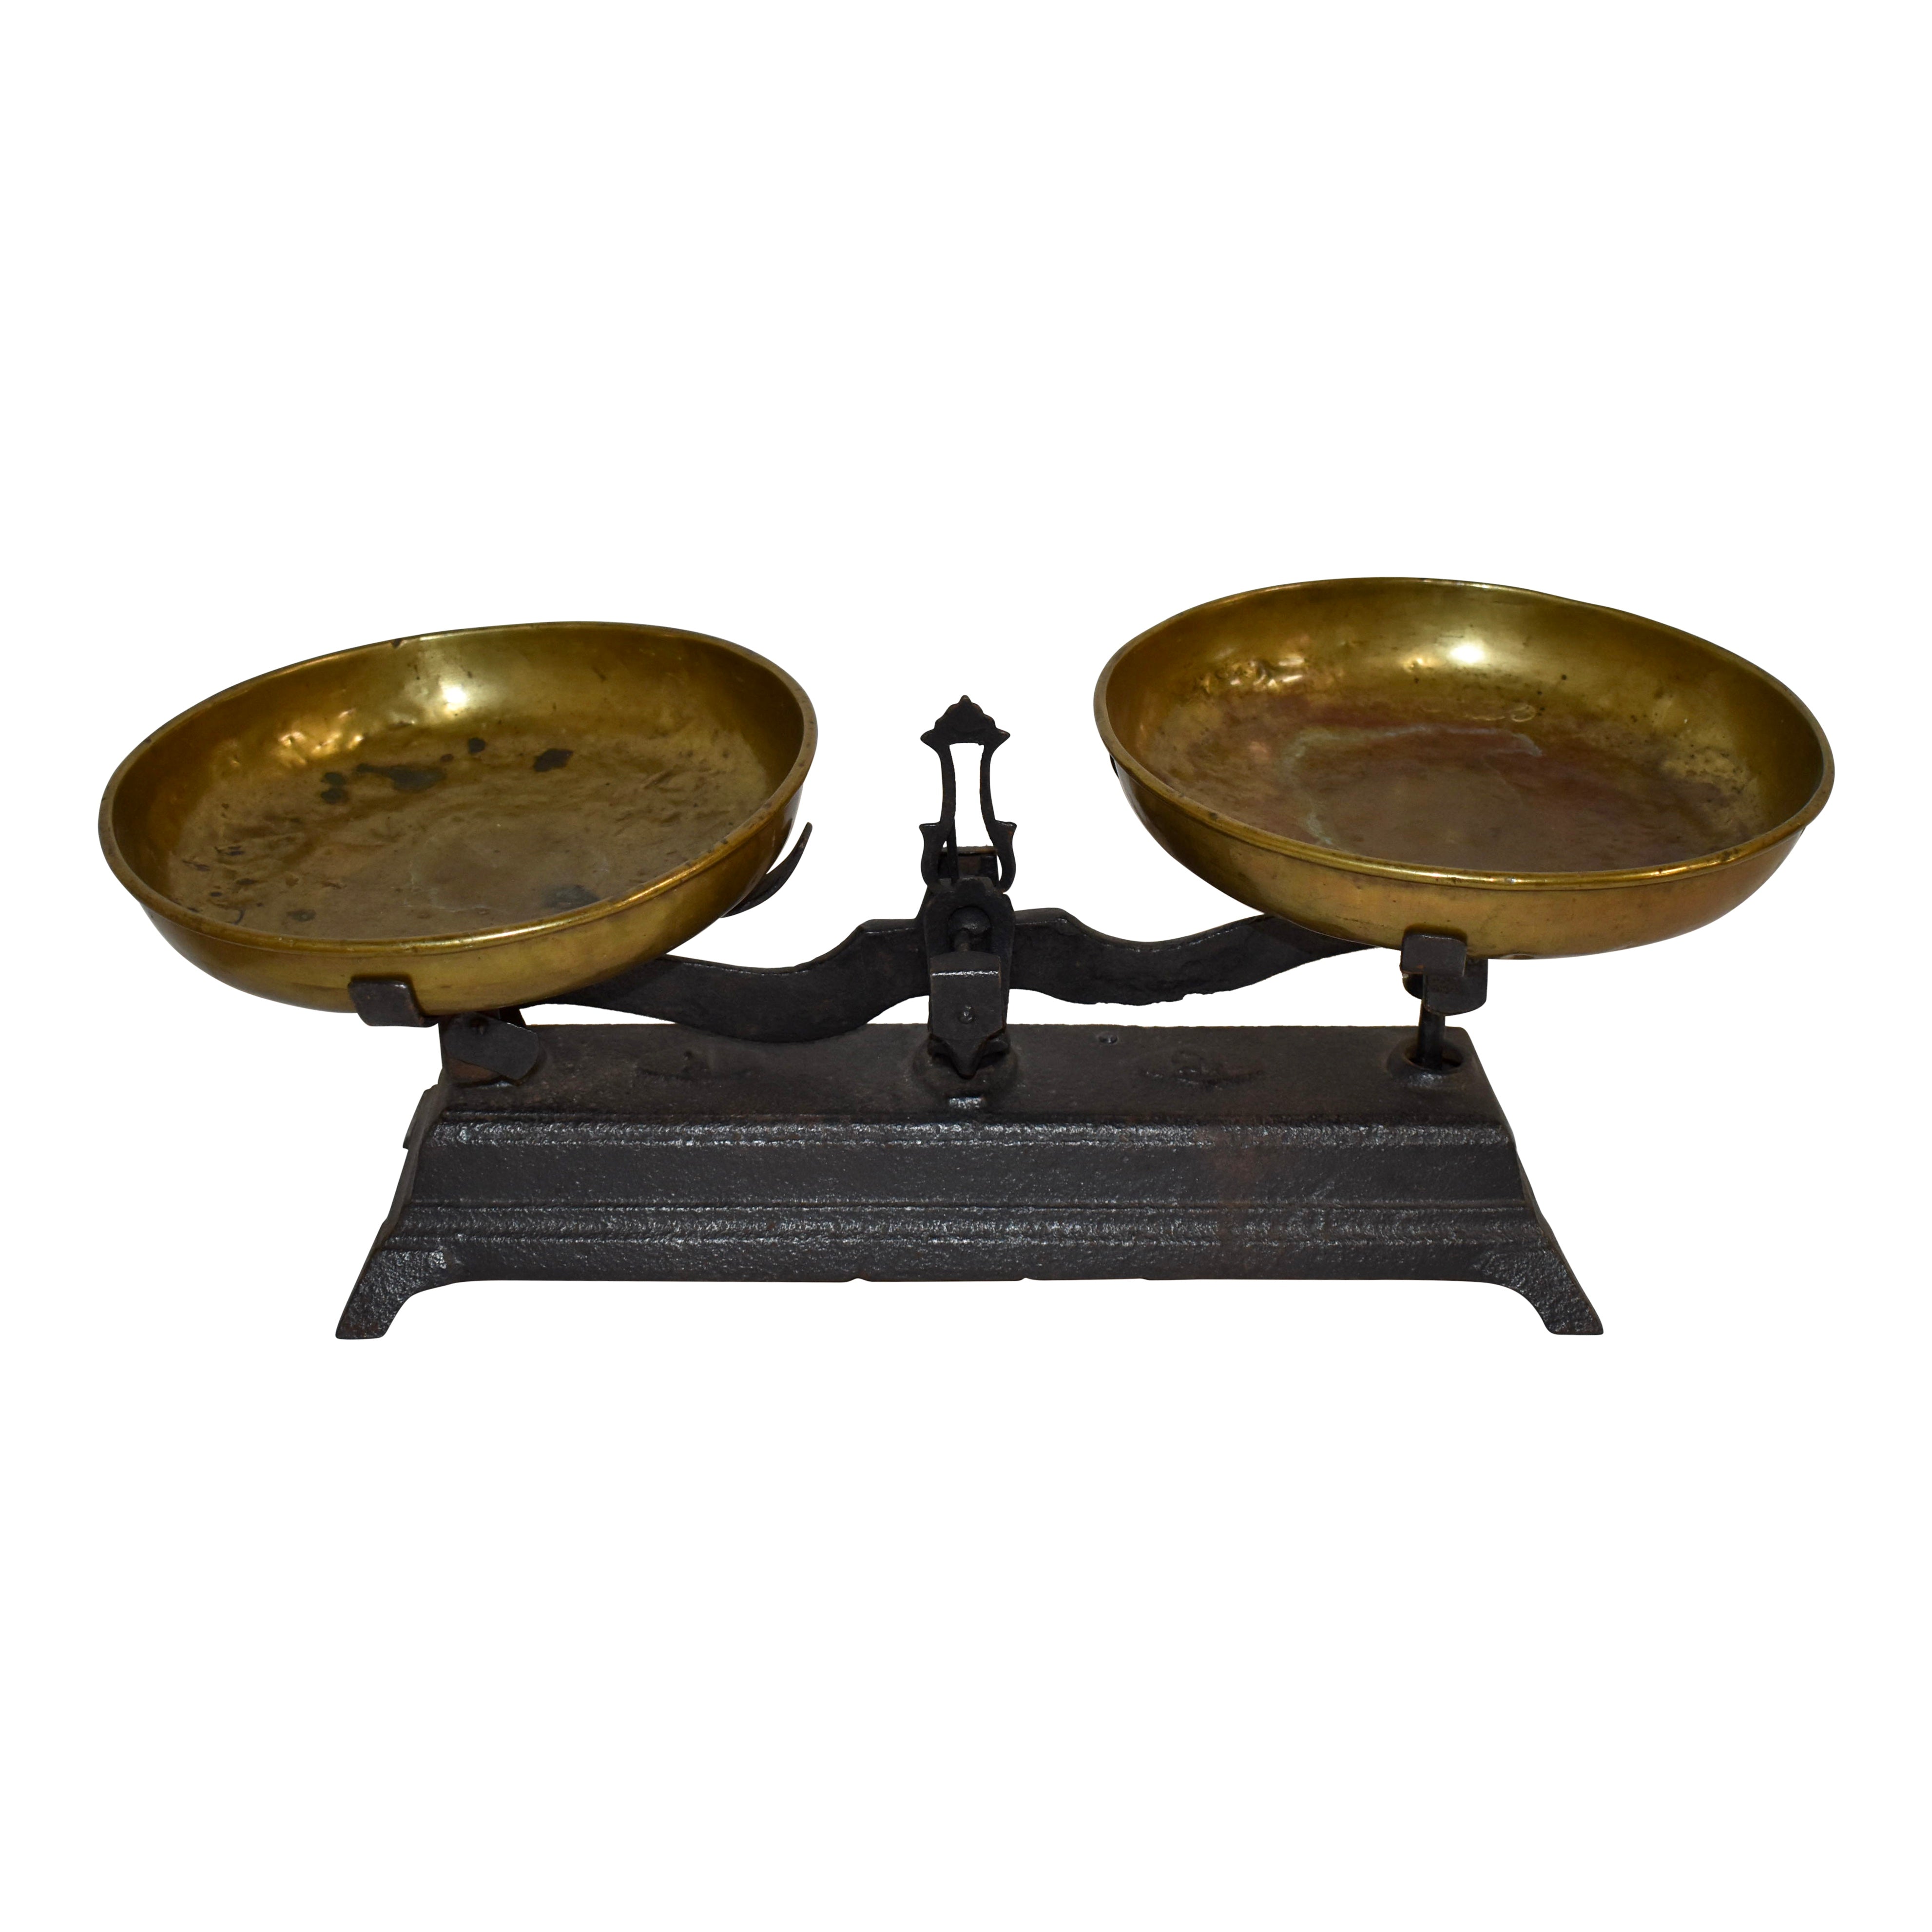 Cast Iron Balance Scale with Brass Pans